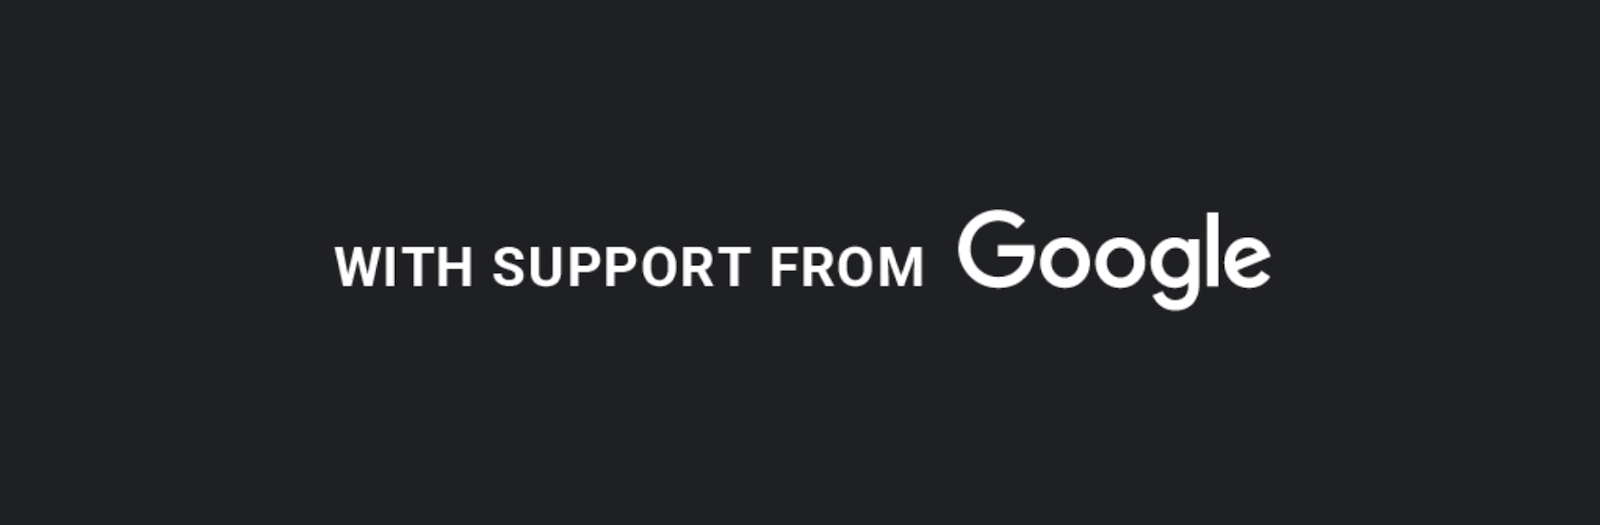 With support from Google logo black